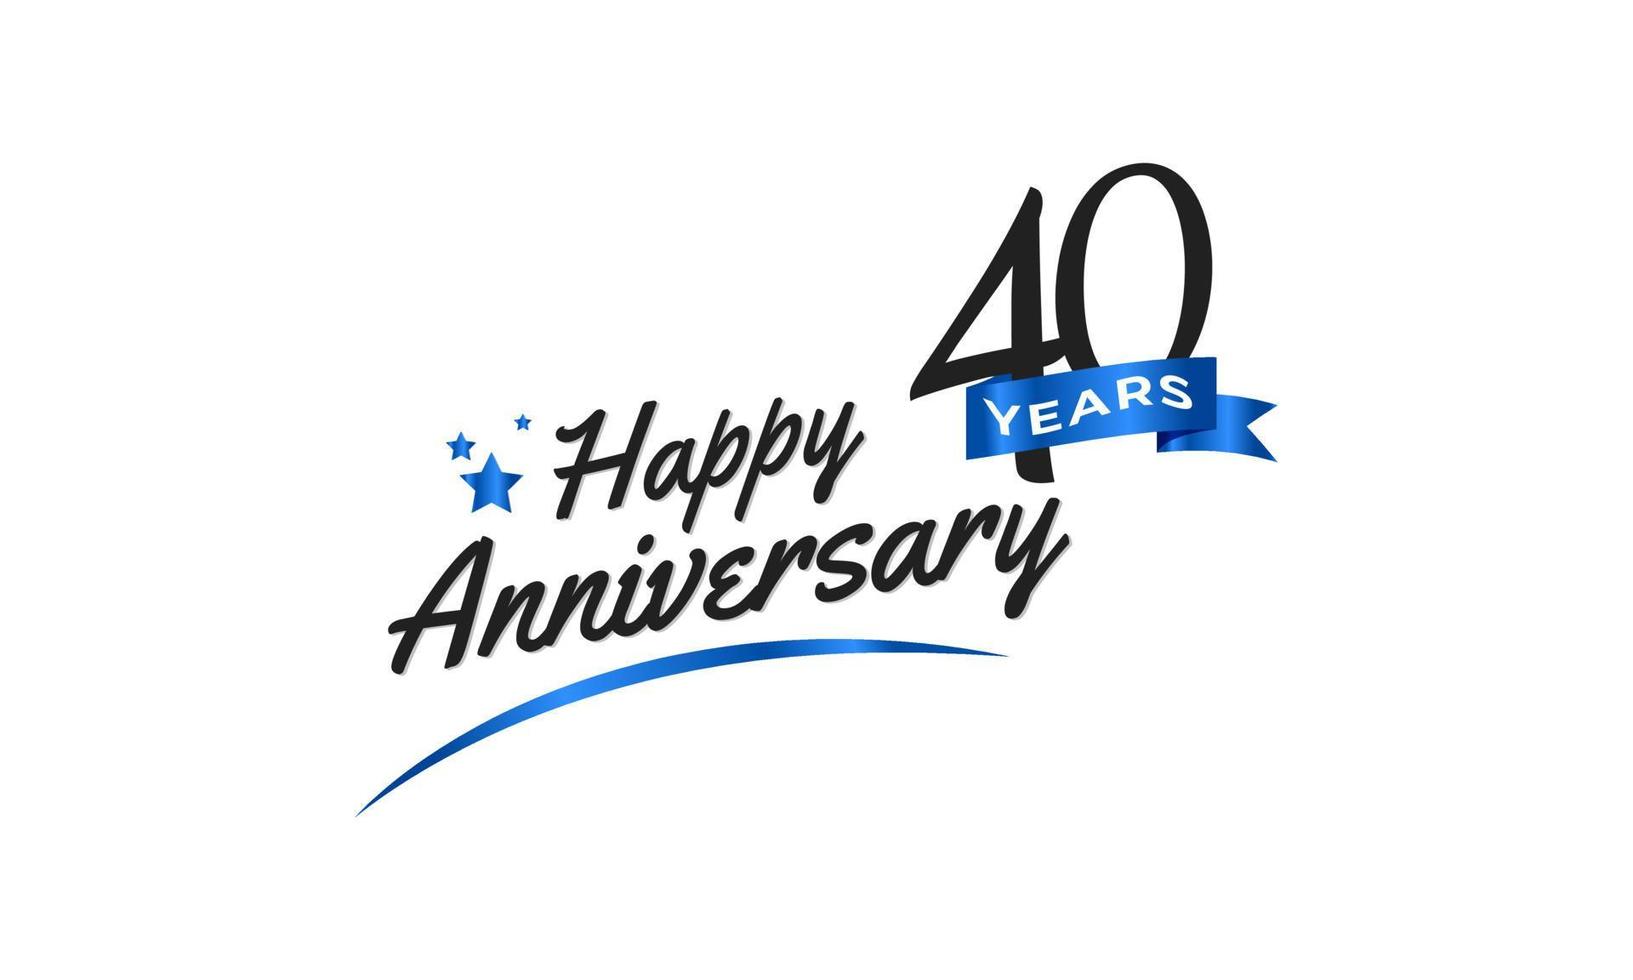 40 Year Anniversary Celebration with Blue Swoosh and Blue Ribbon Symbol. Happy Anniversary Greeting Celebrates Template Design Illustration vector